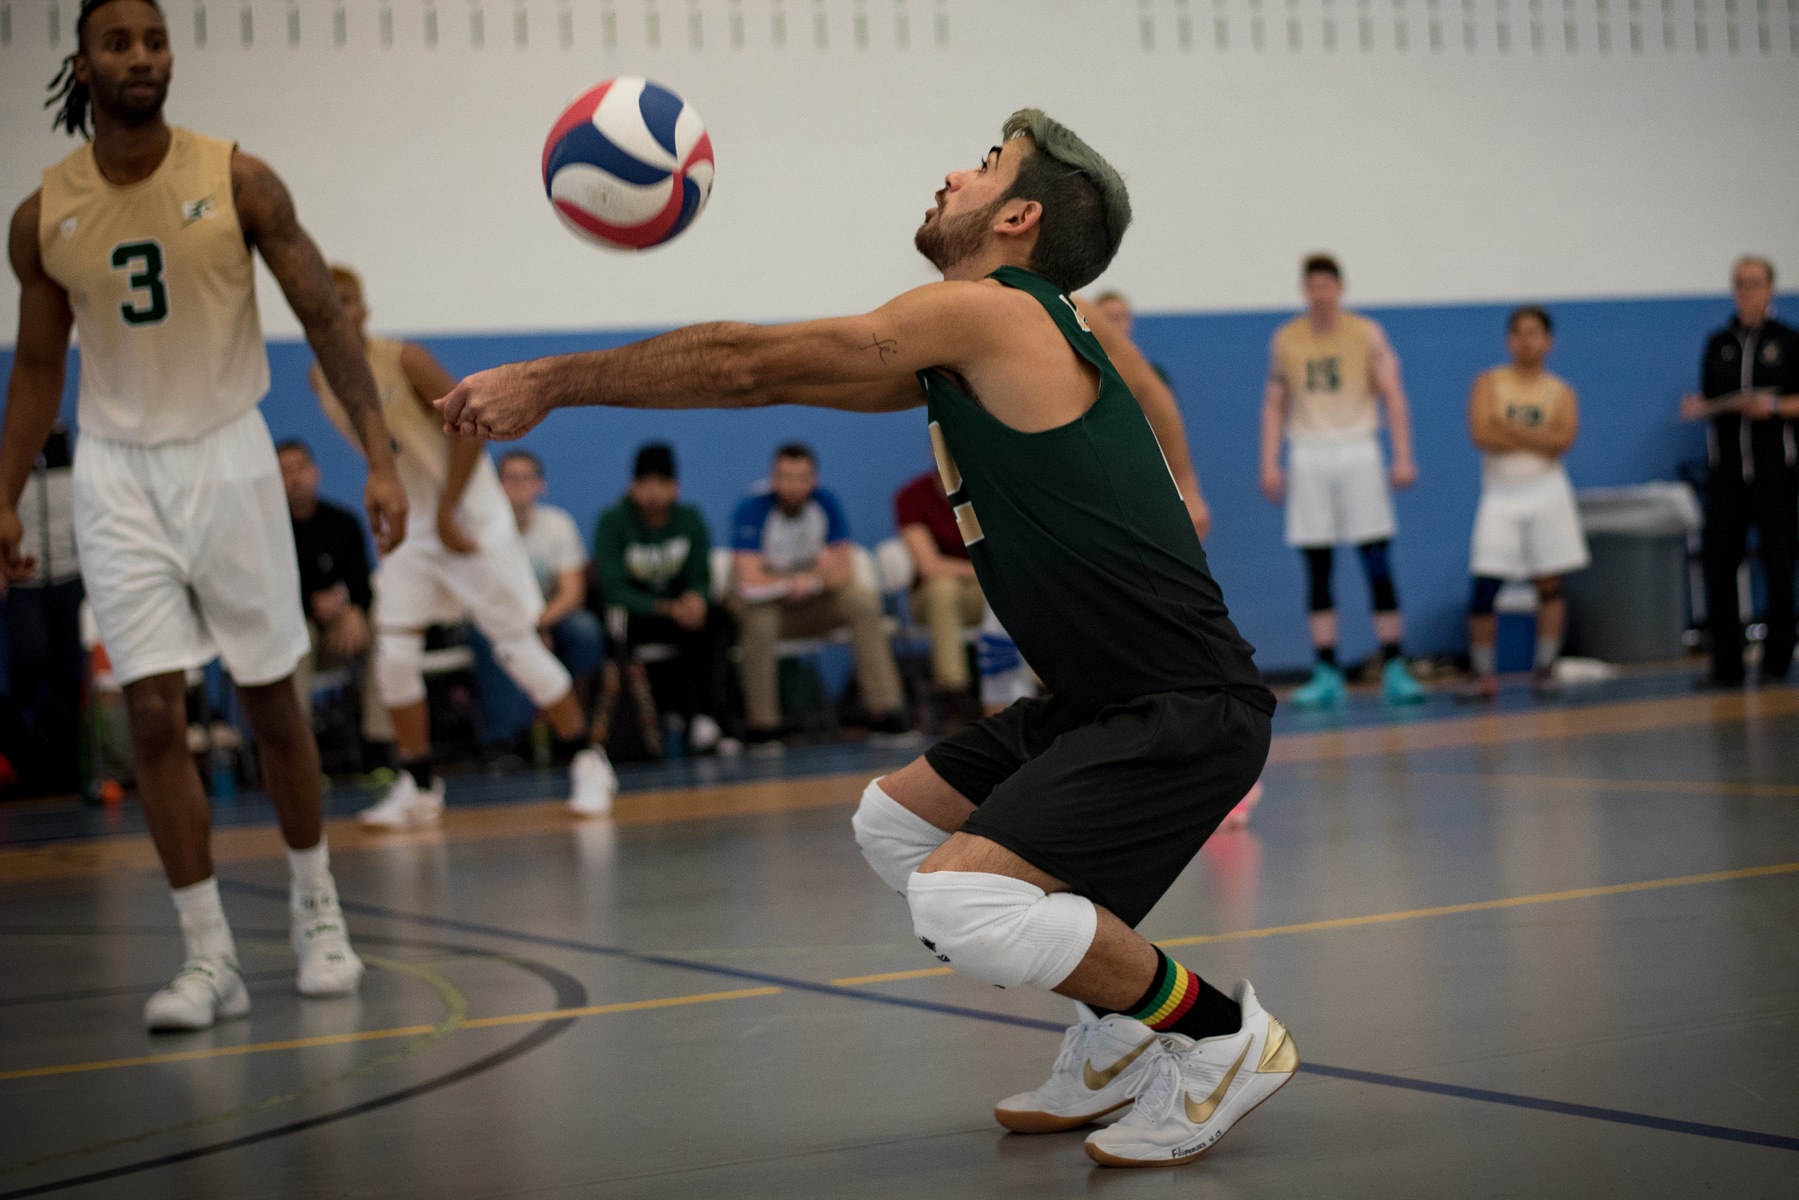 Blazer Men's Volleyball Picks Up Two More Sweeps, Extends Streak To 6